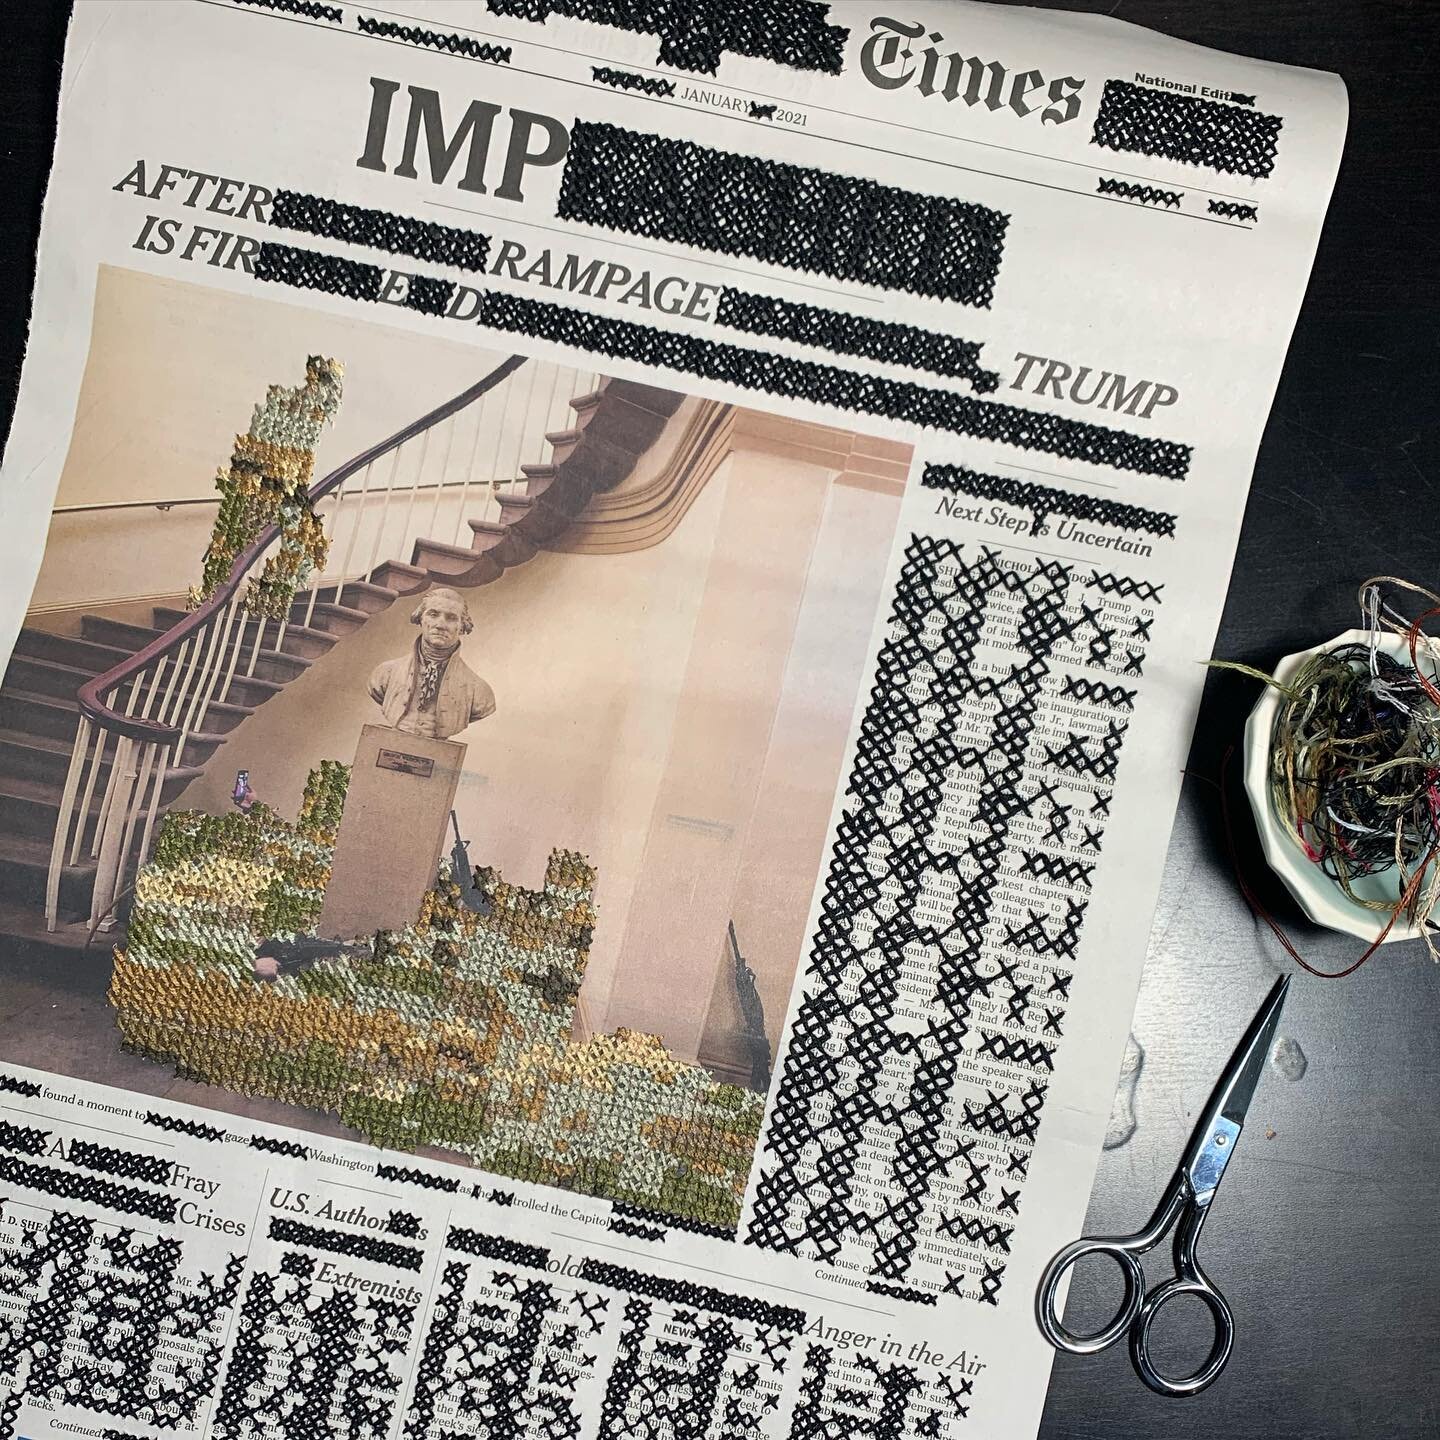 Finished! Sneak peek of a new piece that is headed to SATX for a show with other artist/mothers who helped keep me sane this past year. (Show info below.)

&ldquo;The Impetus of US,&rdquo; cotton thread on newspaper, 22&rdquo; x 11.5&rdquo; 2021

Thi